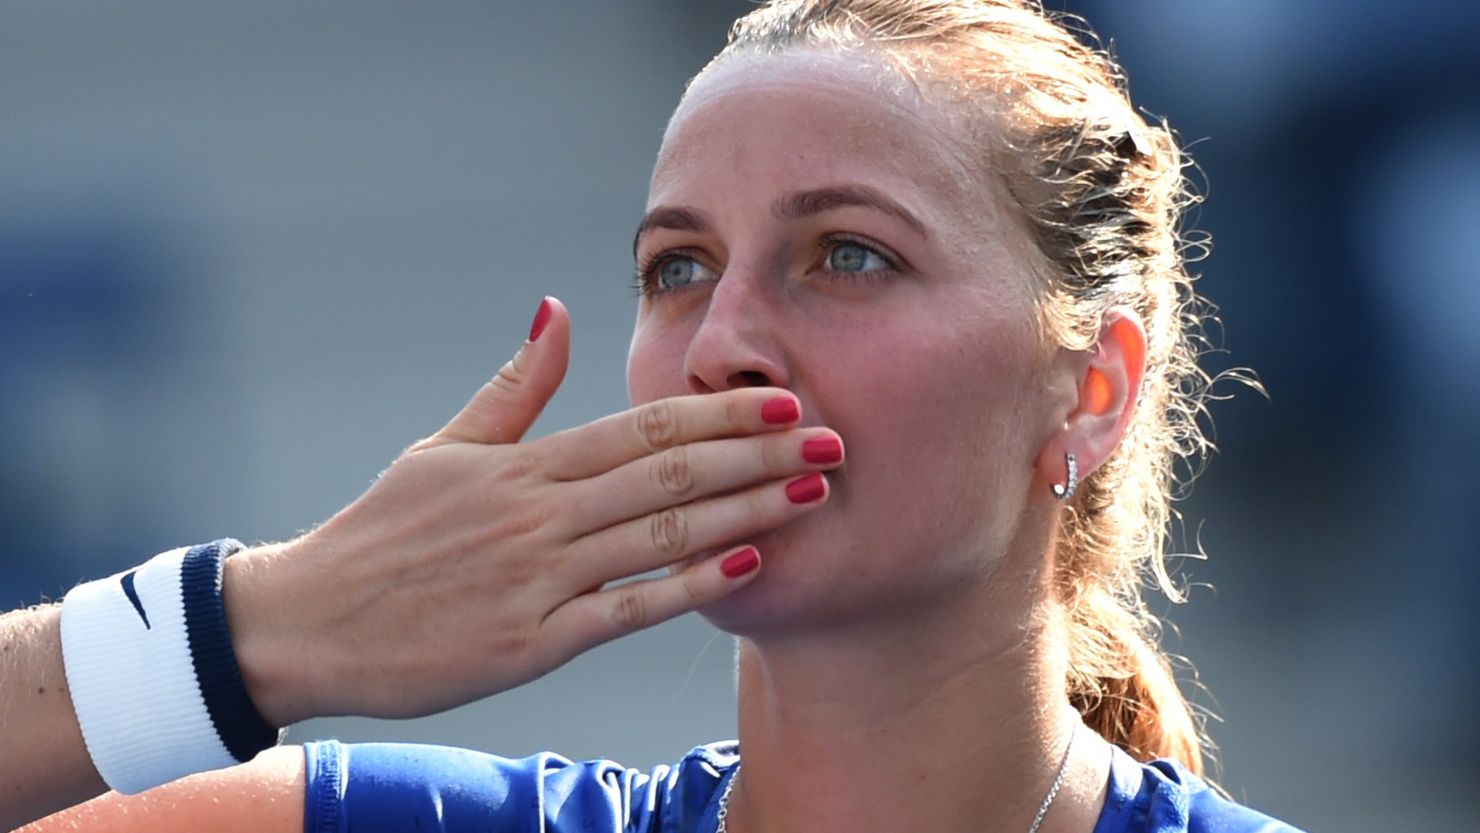 Petra Kvitova blows a kiss to the crowd after a convincing first round victory at Flushing Meadows.